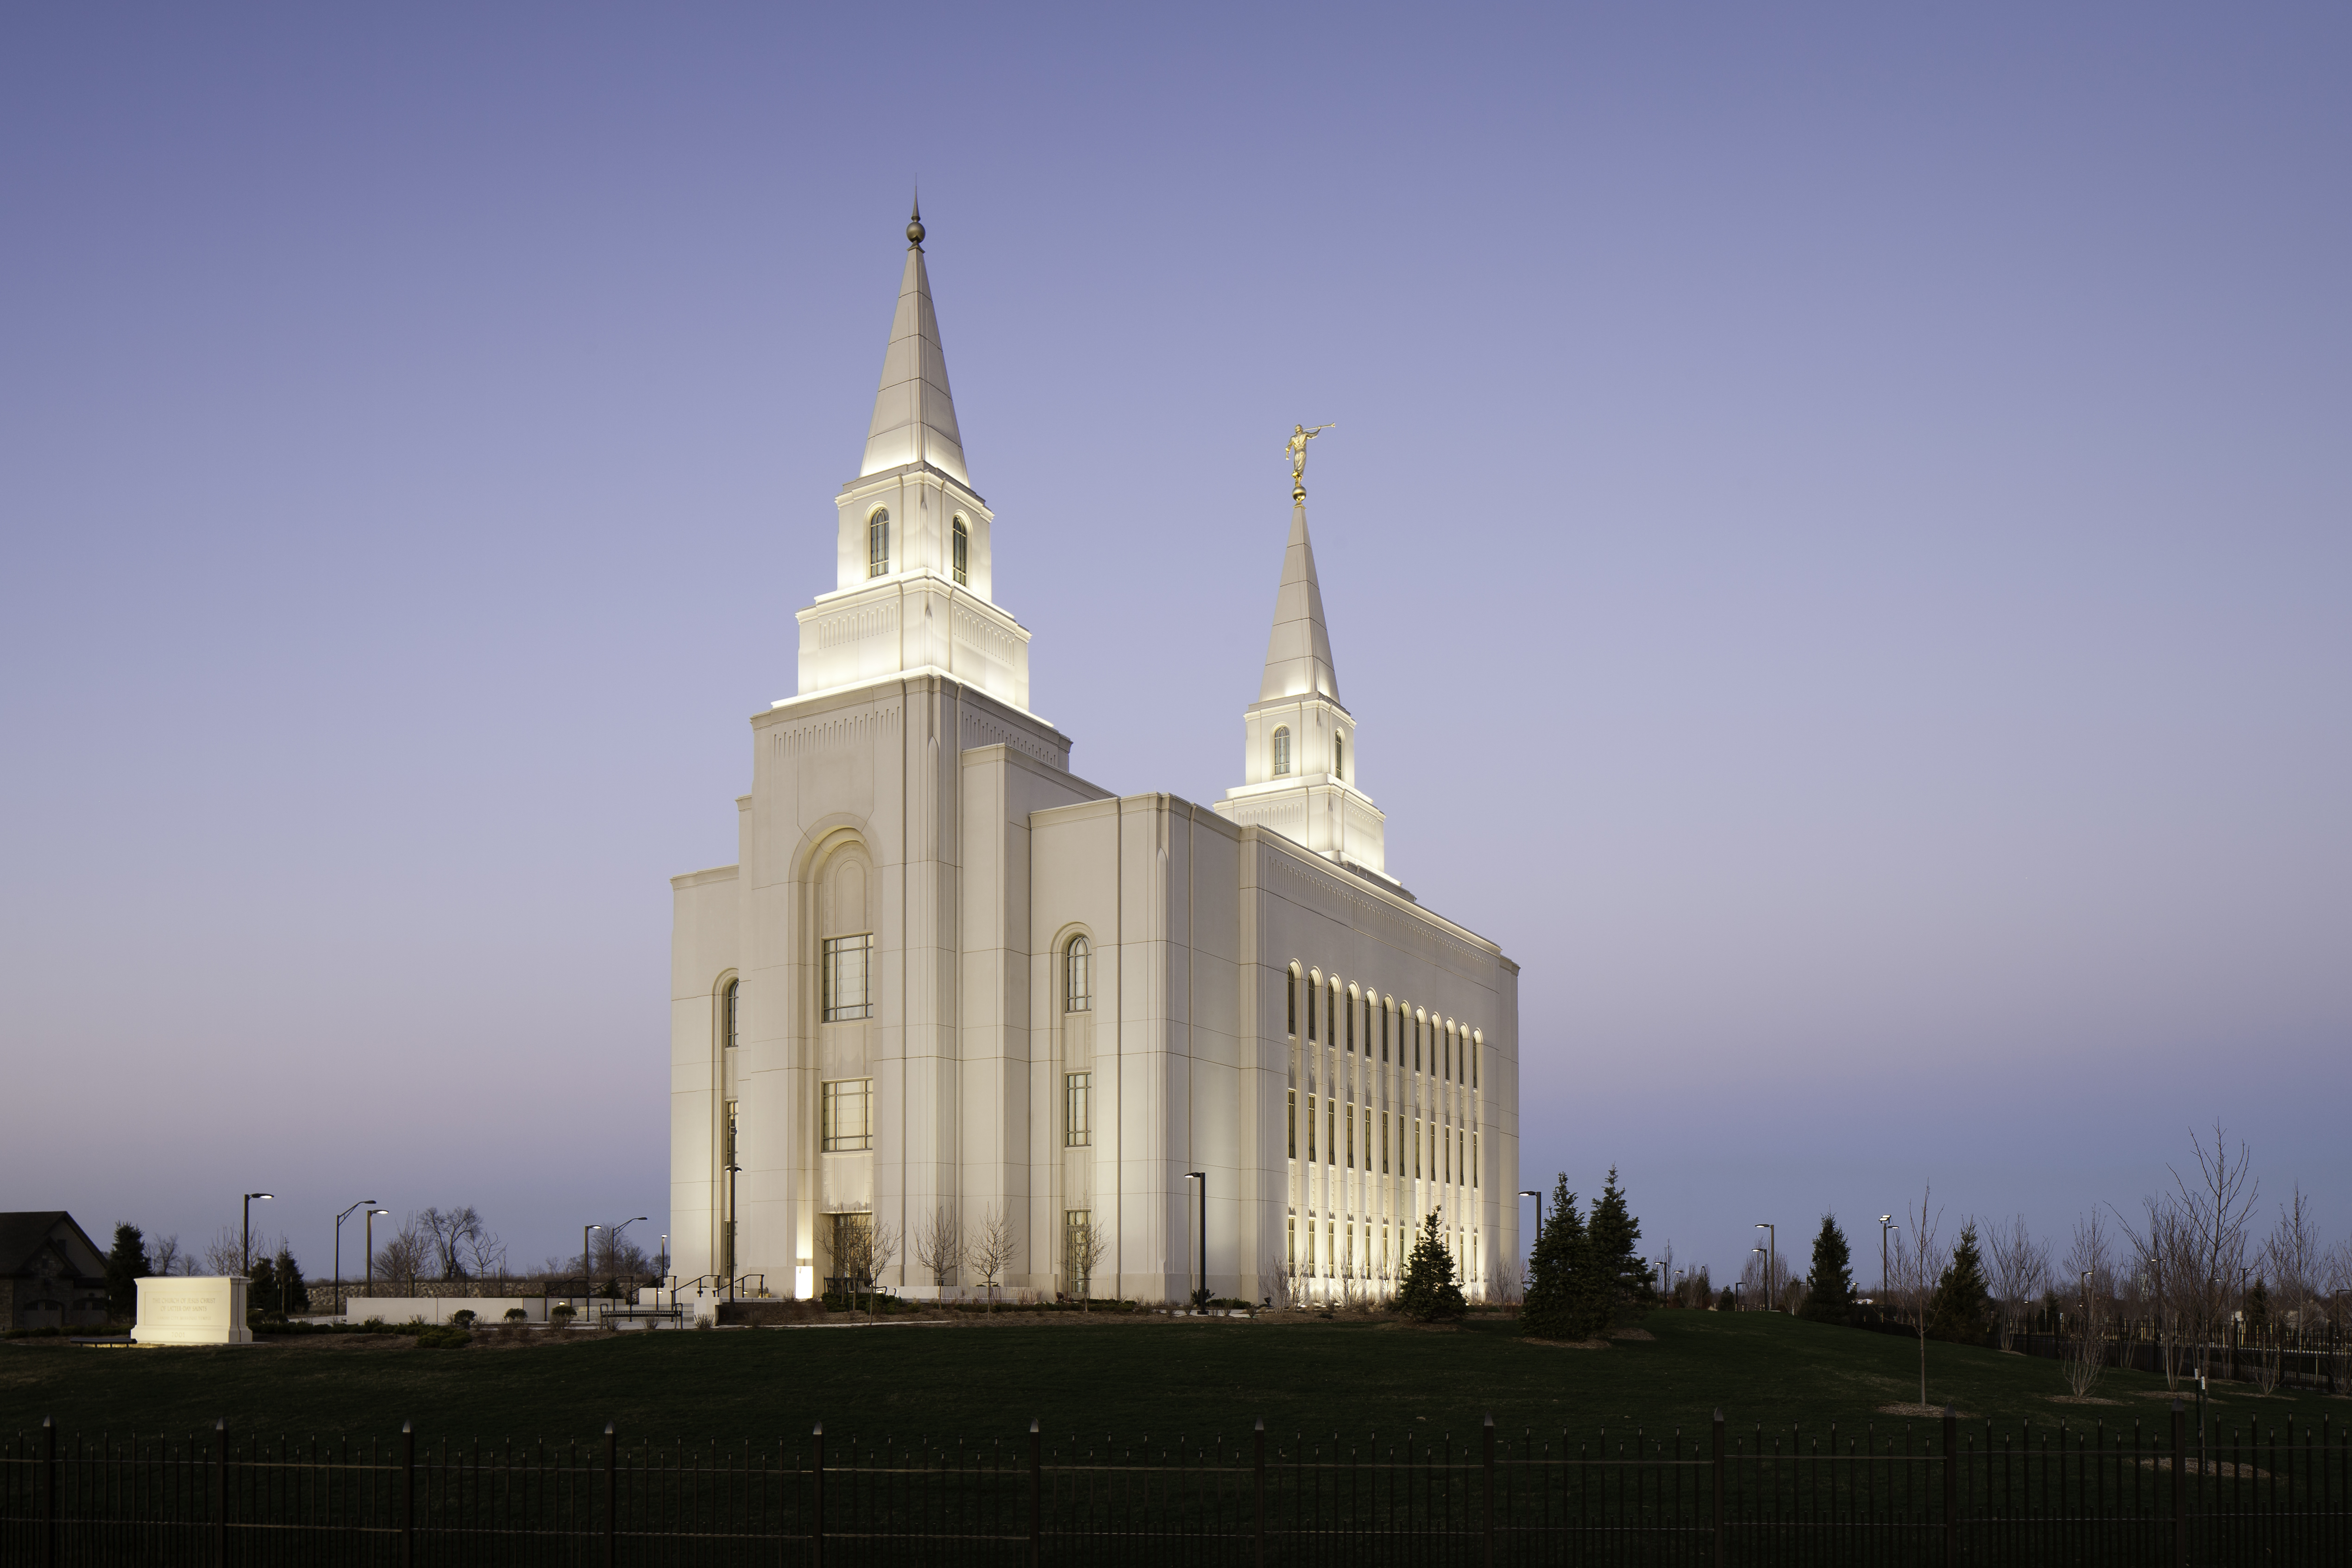 The Kansas City Missouri Temple at night, with the lights illuminating the exterior of the building and a blue sky above.